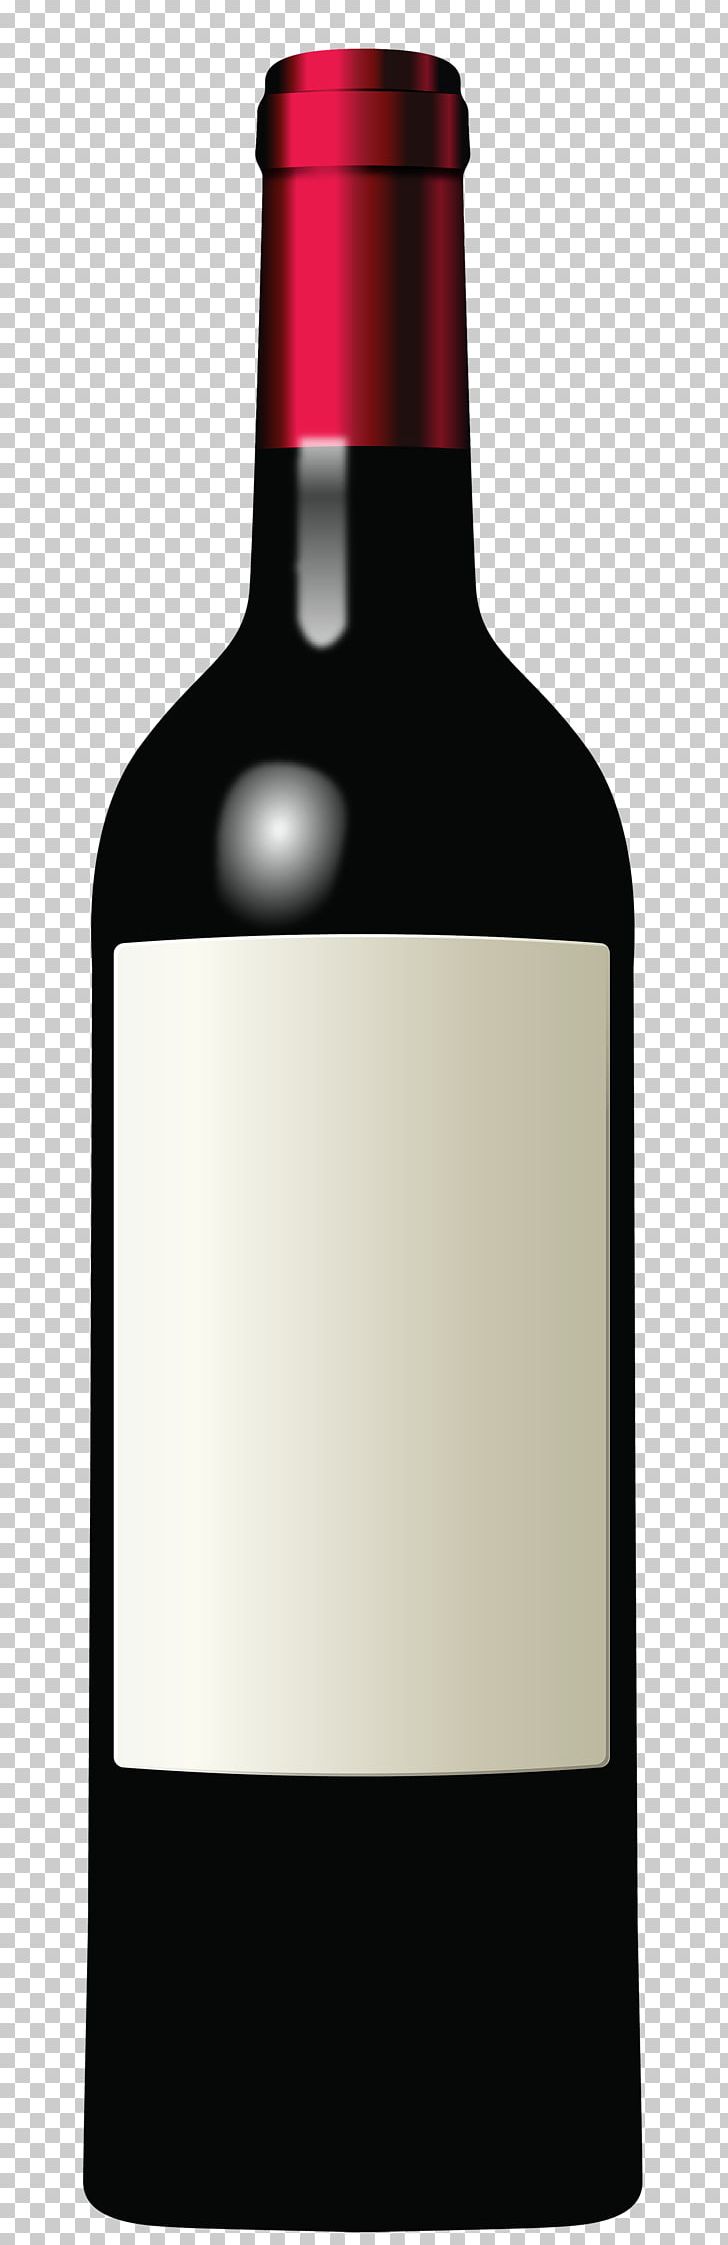 Red Wine Champagne Bottle PNG, Clipart, Alcohol, Awesome, Beer Bottle, Candle, Champagne Glass Free PNG Download